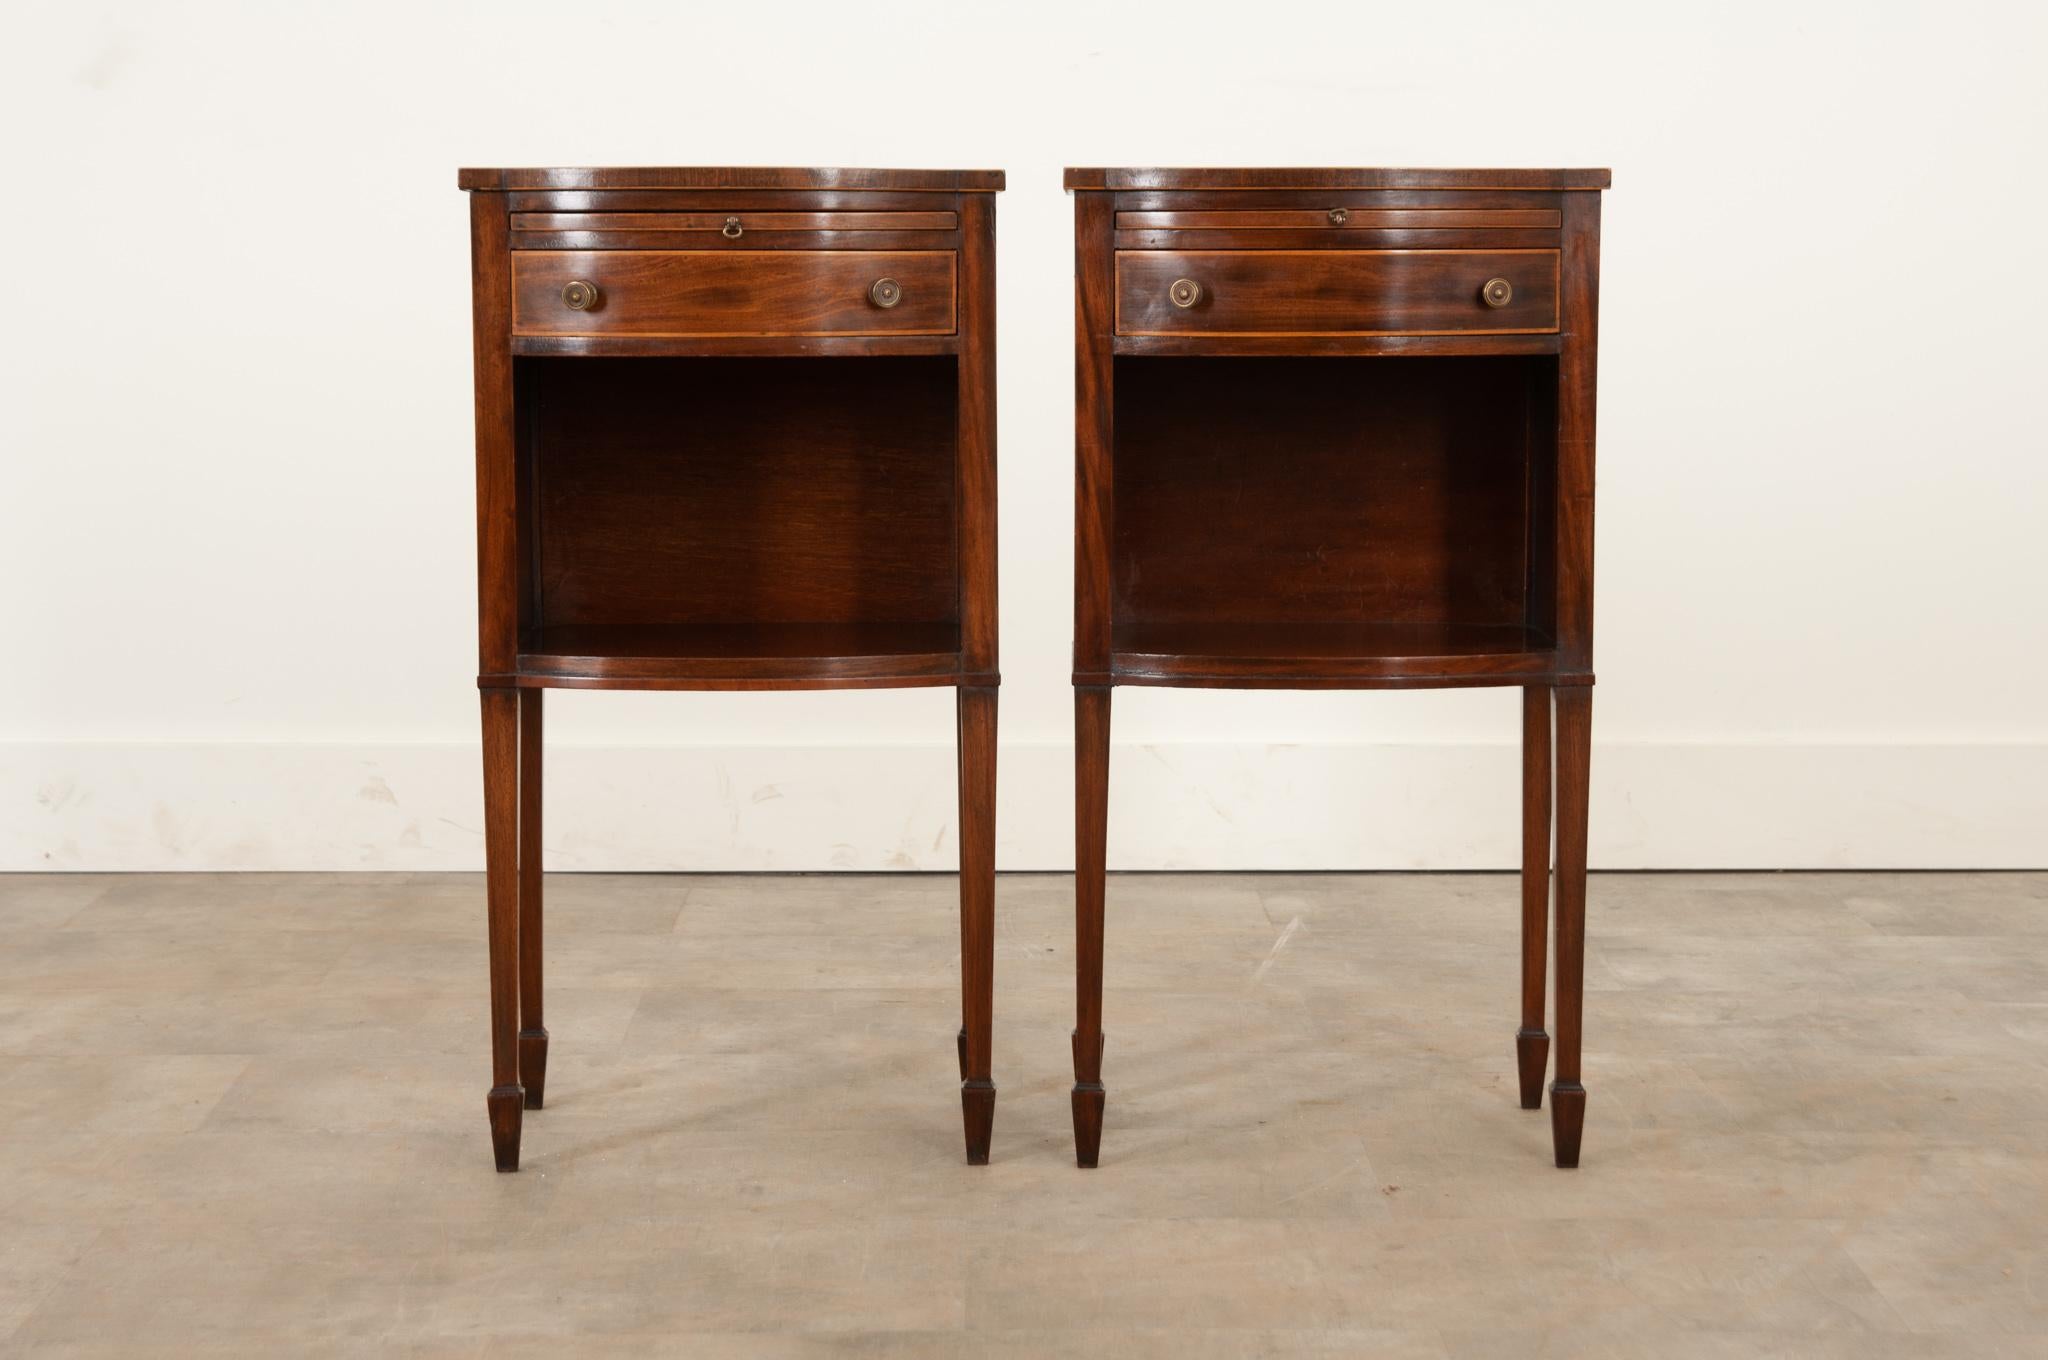 Other English Pair of Mahogany Bedside Tables